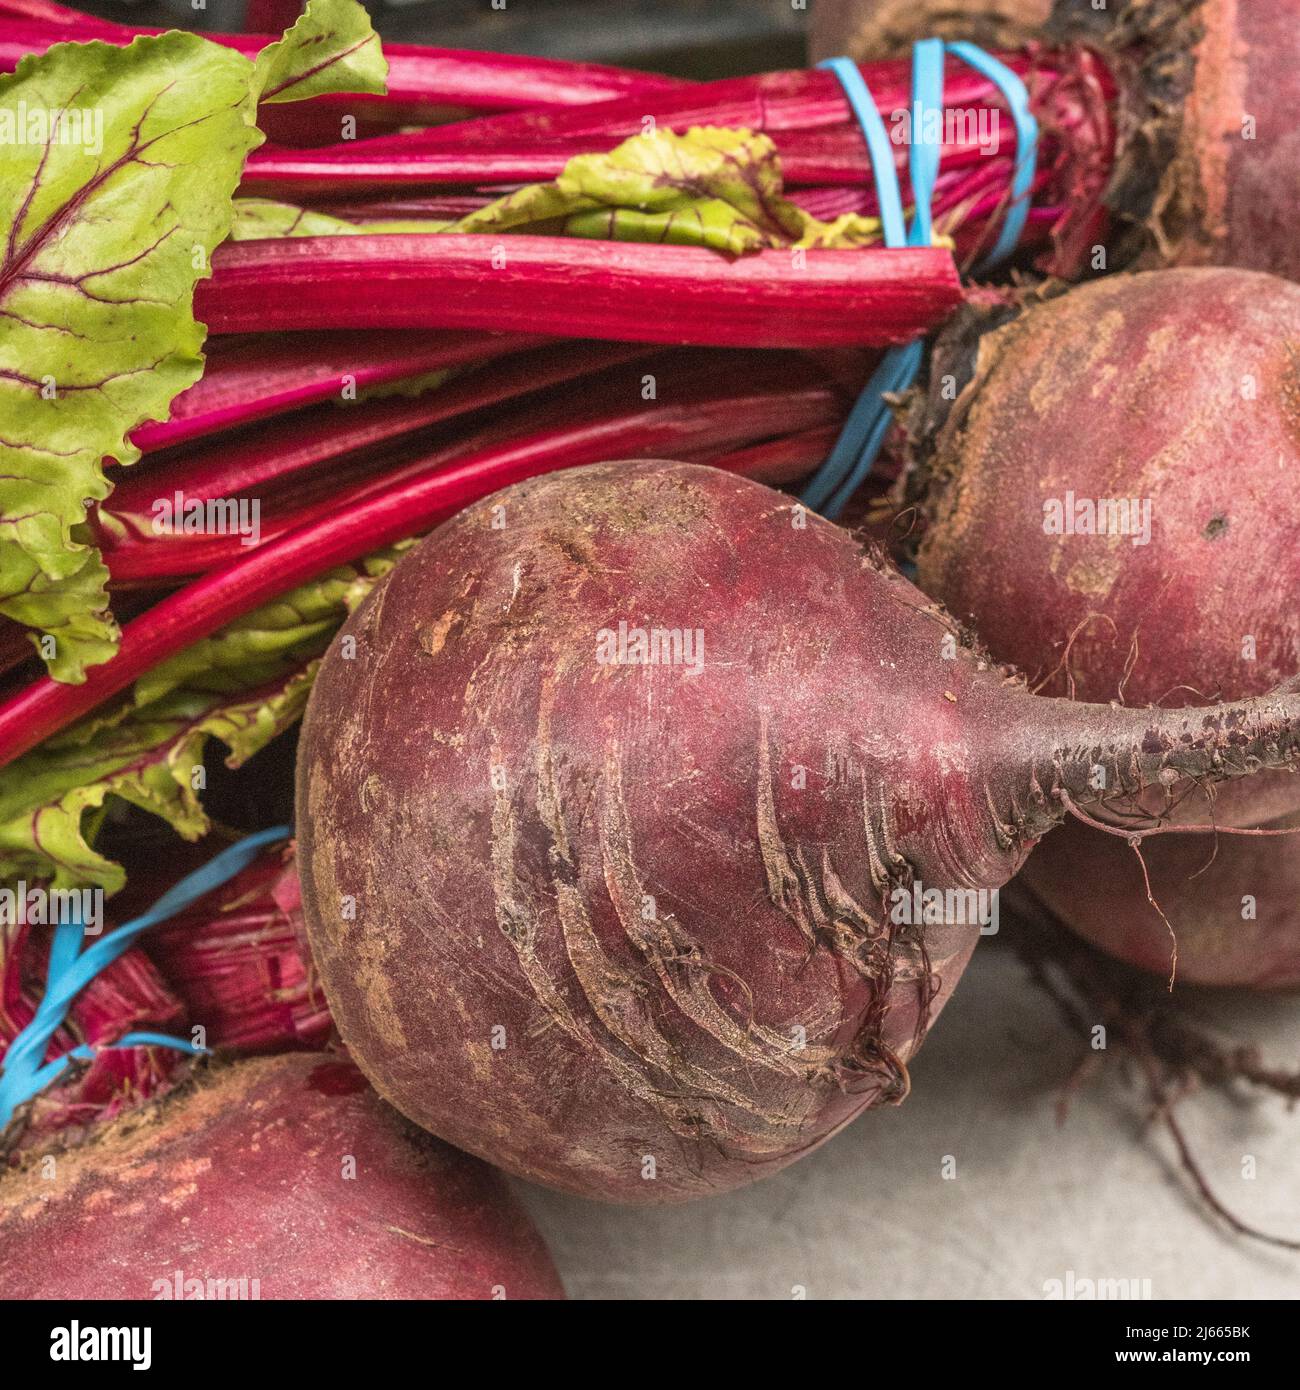 Purple-red taproot of Red Beet, Beetroot / Beta vulgaris on a tabletop in a country market. Stock Photo